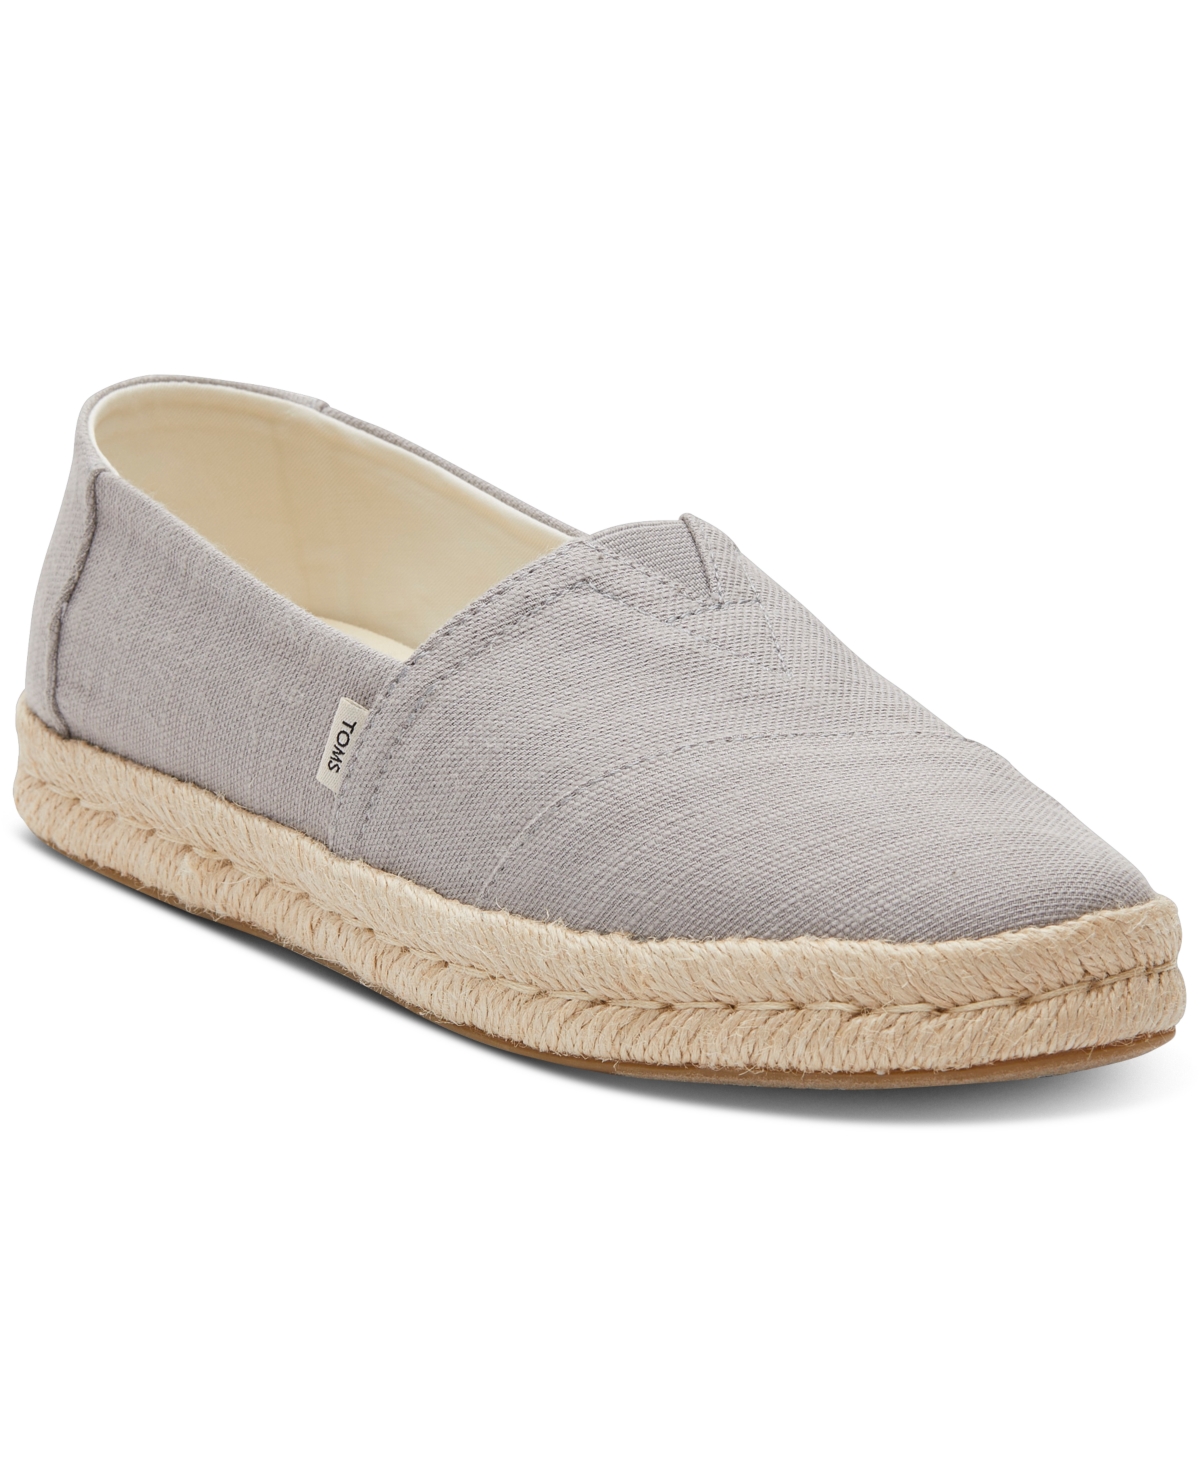 Toms Women's Alpargata Rope 2.0 Espadrille Slip-on Flats In Drizzle Grey Recycled Cotton Slubby